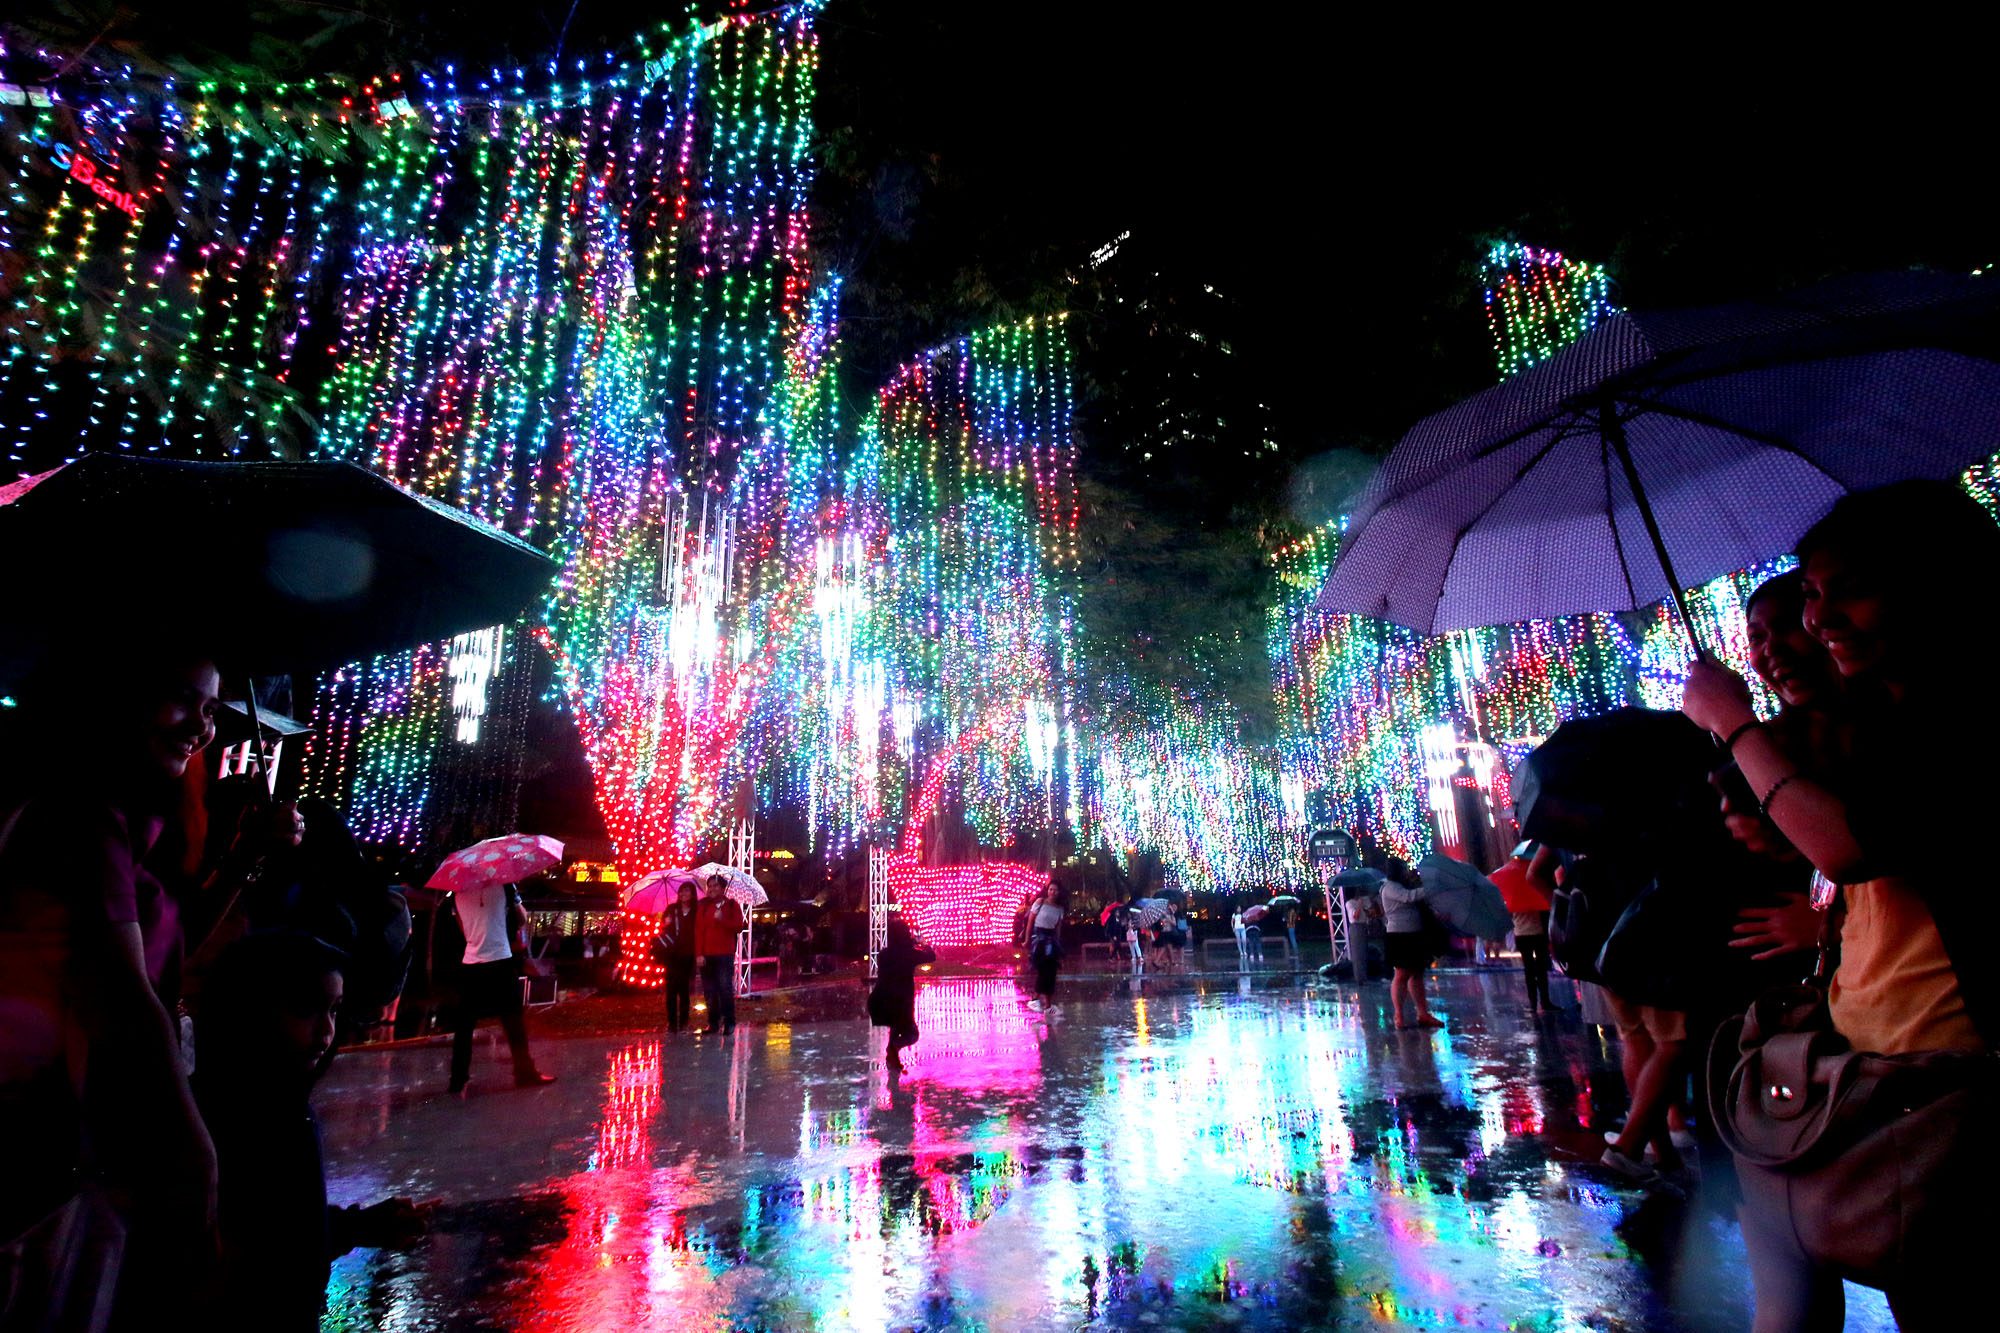 LOOK: The 2017 Festival of Lights at Ayala Triangle